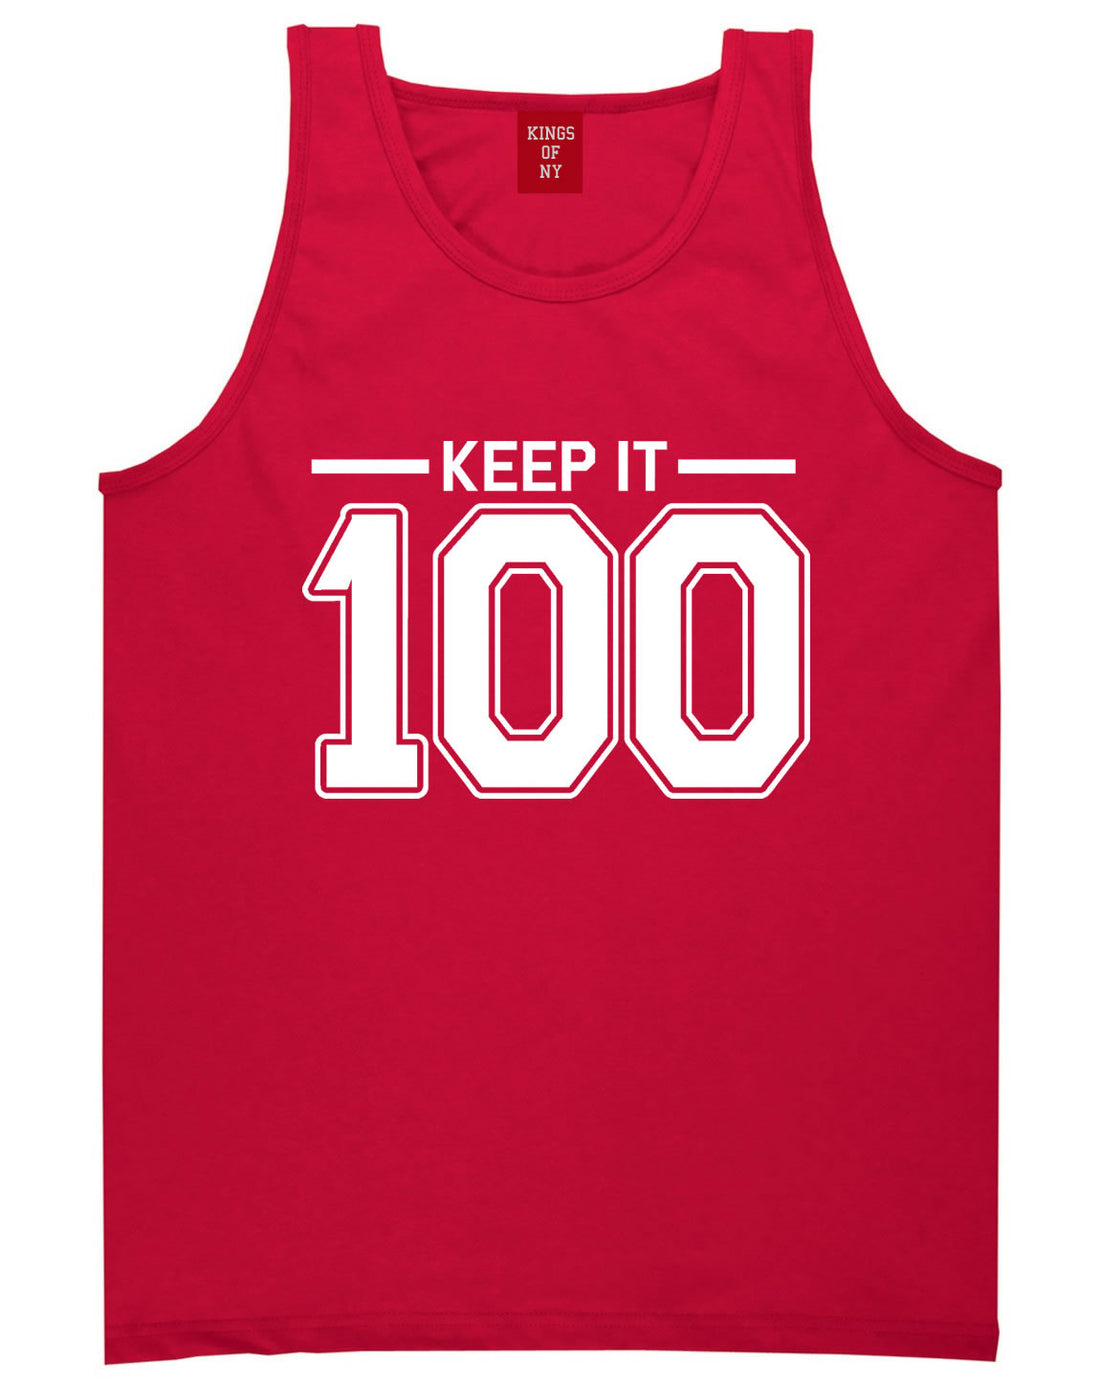 Keep It 100 Tank Top in Red by Kings Of NY